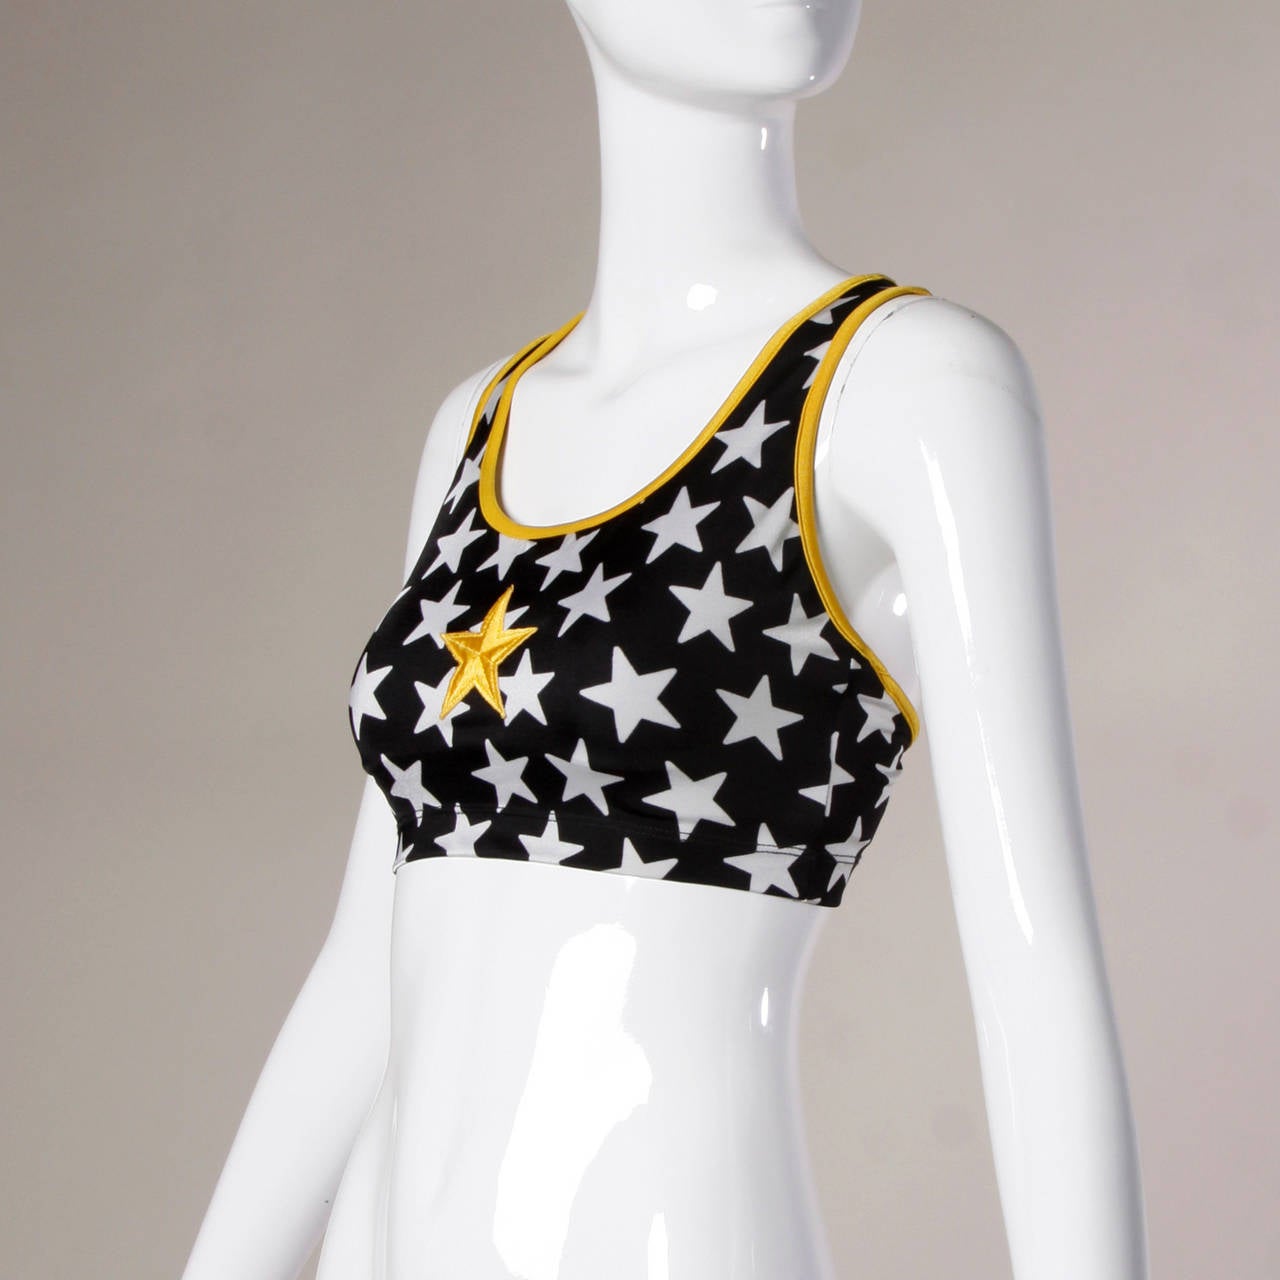 Iconic star print crop top with a sporty star applique by Norma Kamali. This crop top is from the Norma Kamali's OMO collection which was worn in the infamous gym scene of the 1996 cult classic movie Clueless starring Alicia